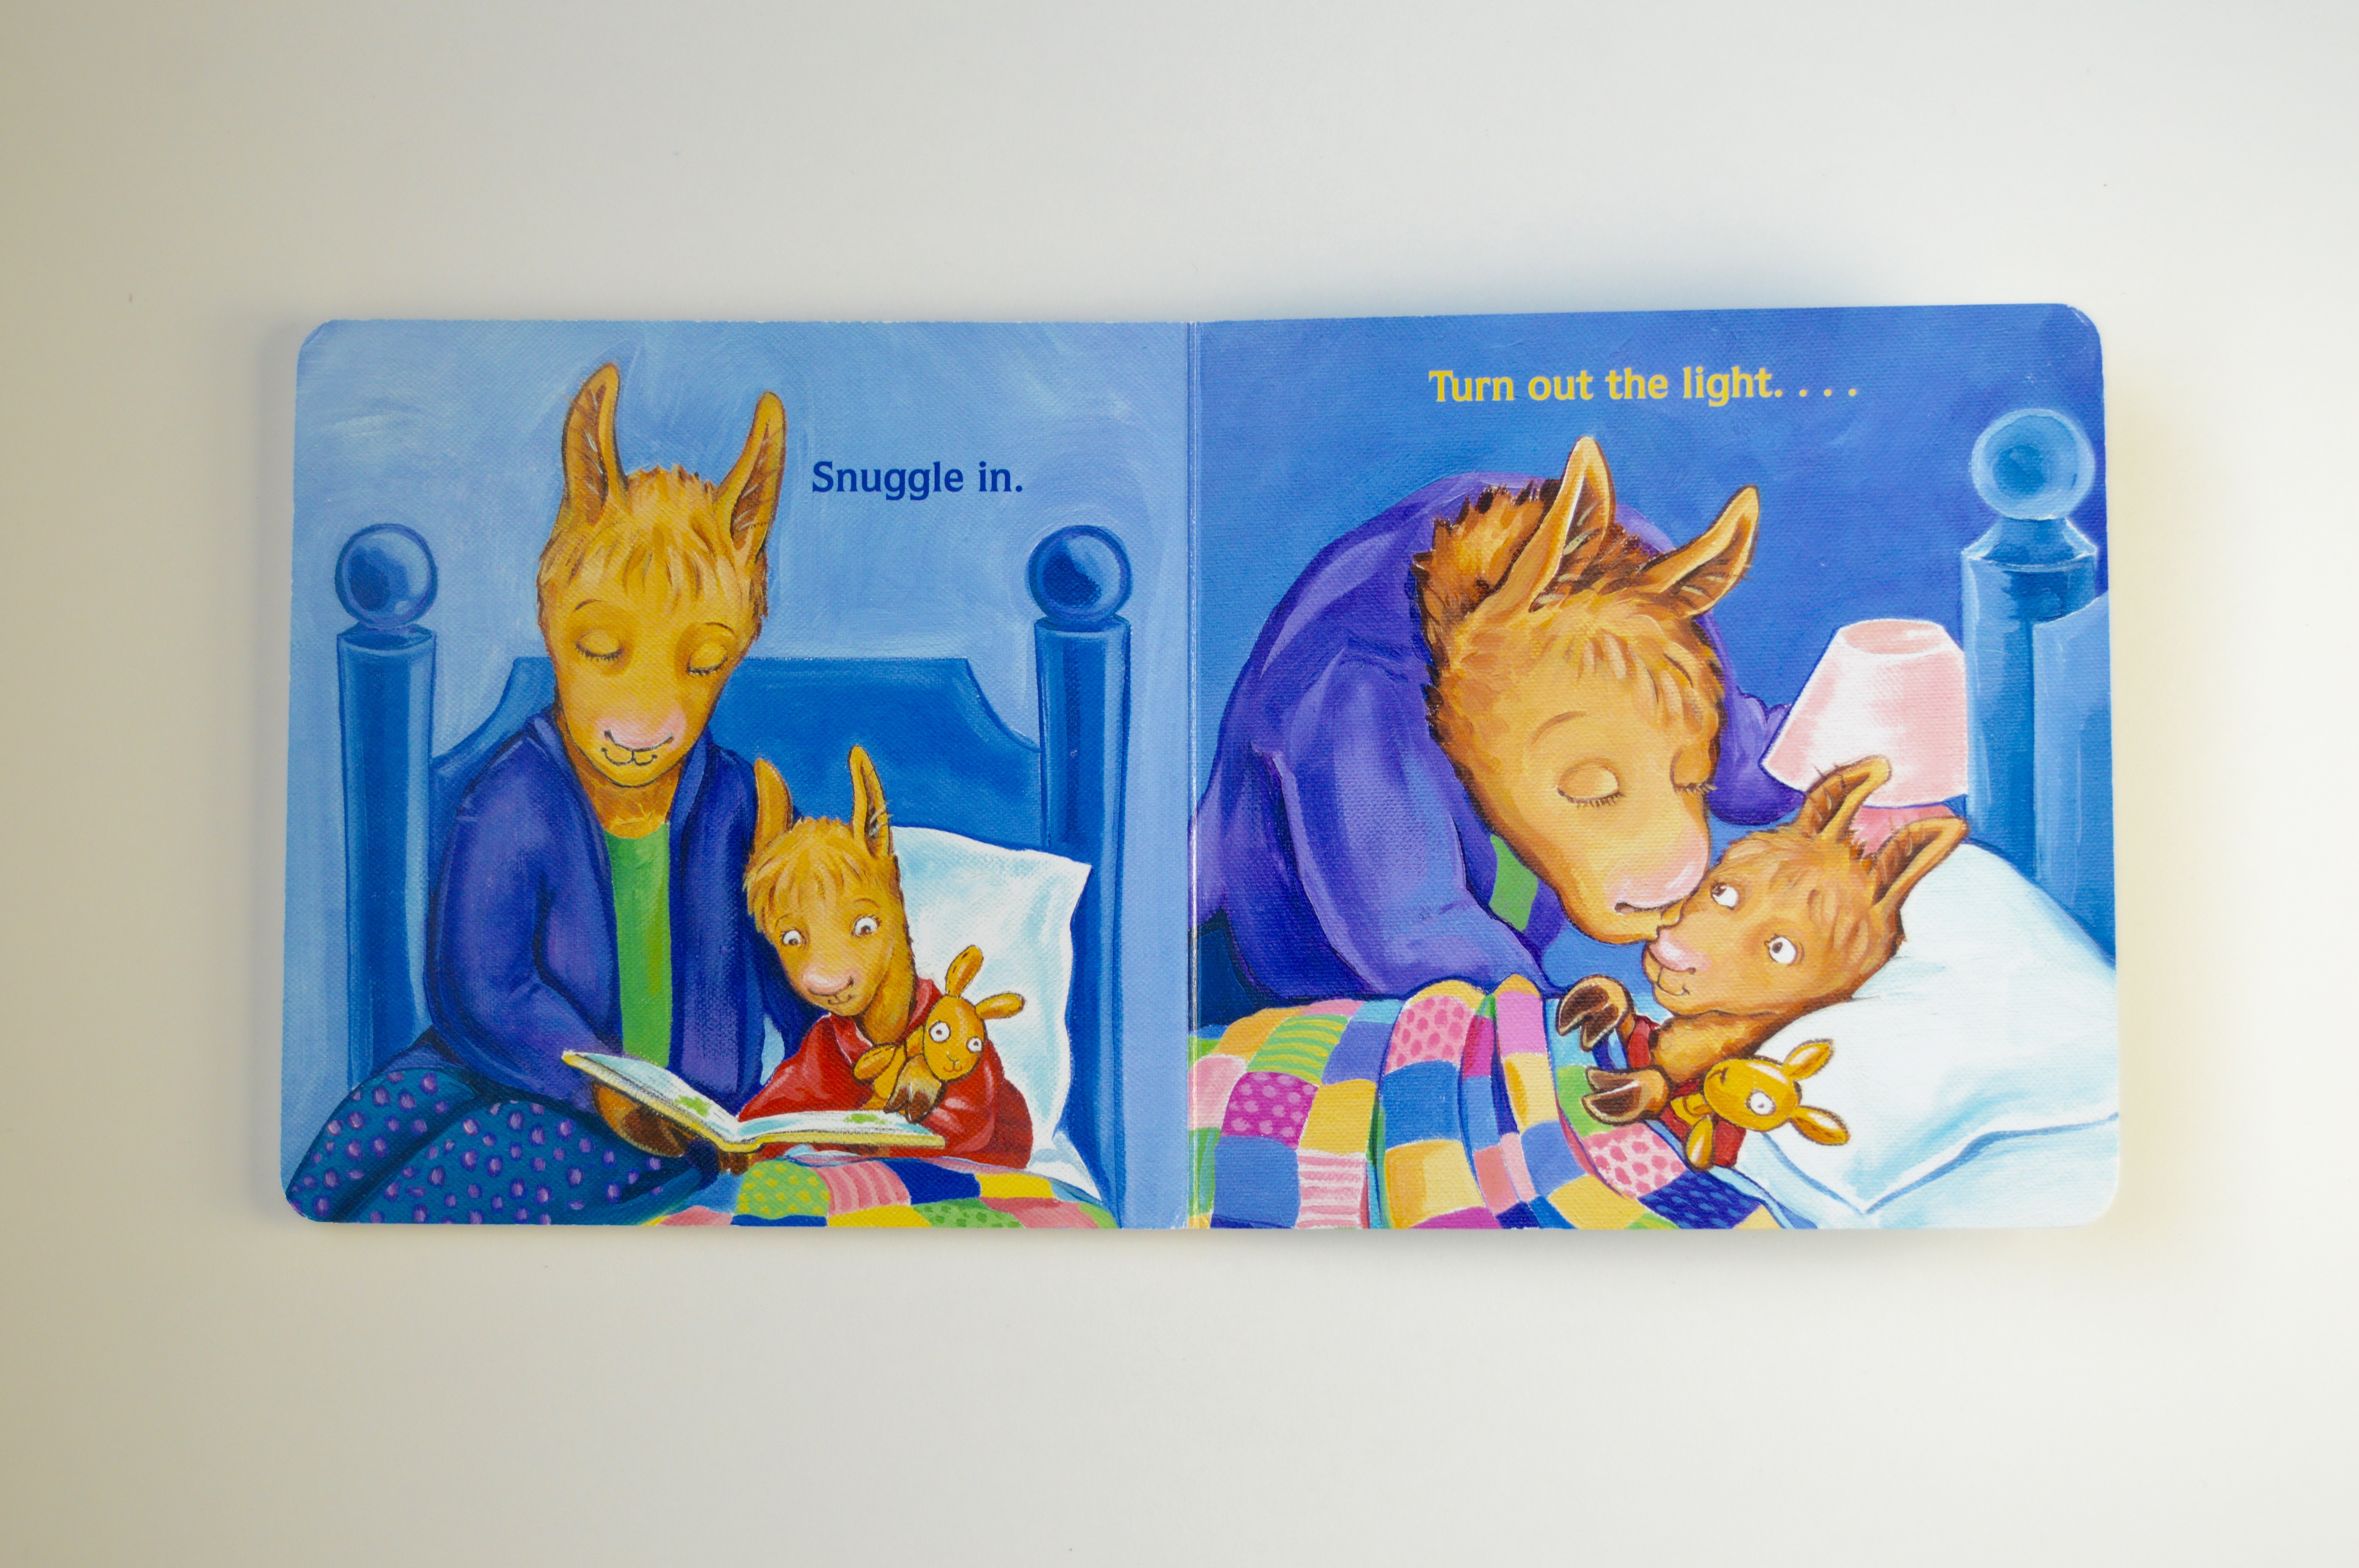 Llama Llama Nighty Night | Top ten baby board books to read with your child. List of the best board books for little girls + boys. Board book list to know + baby shower gift ideas.